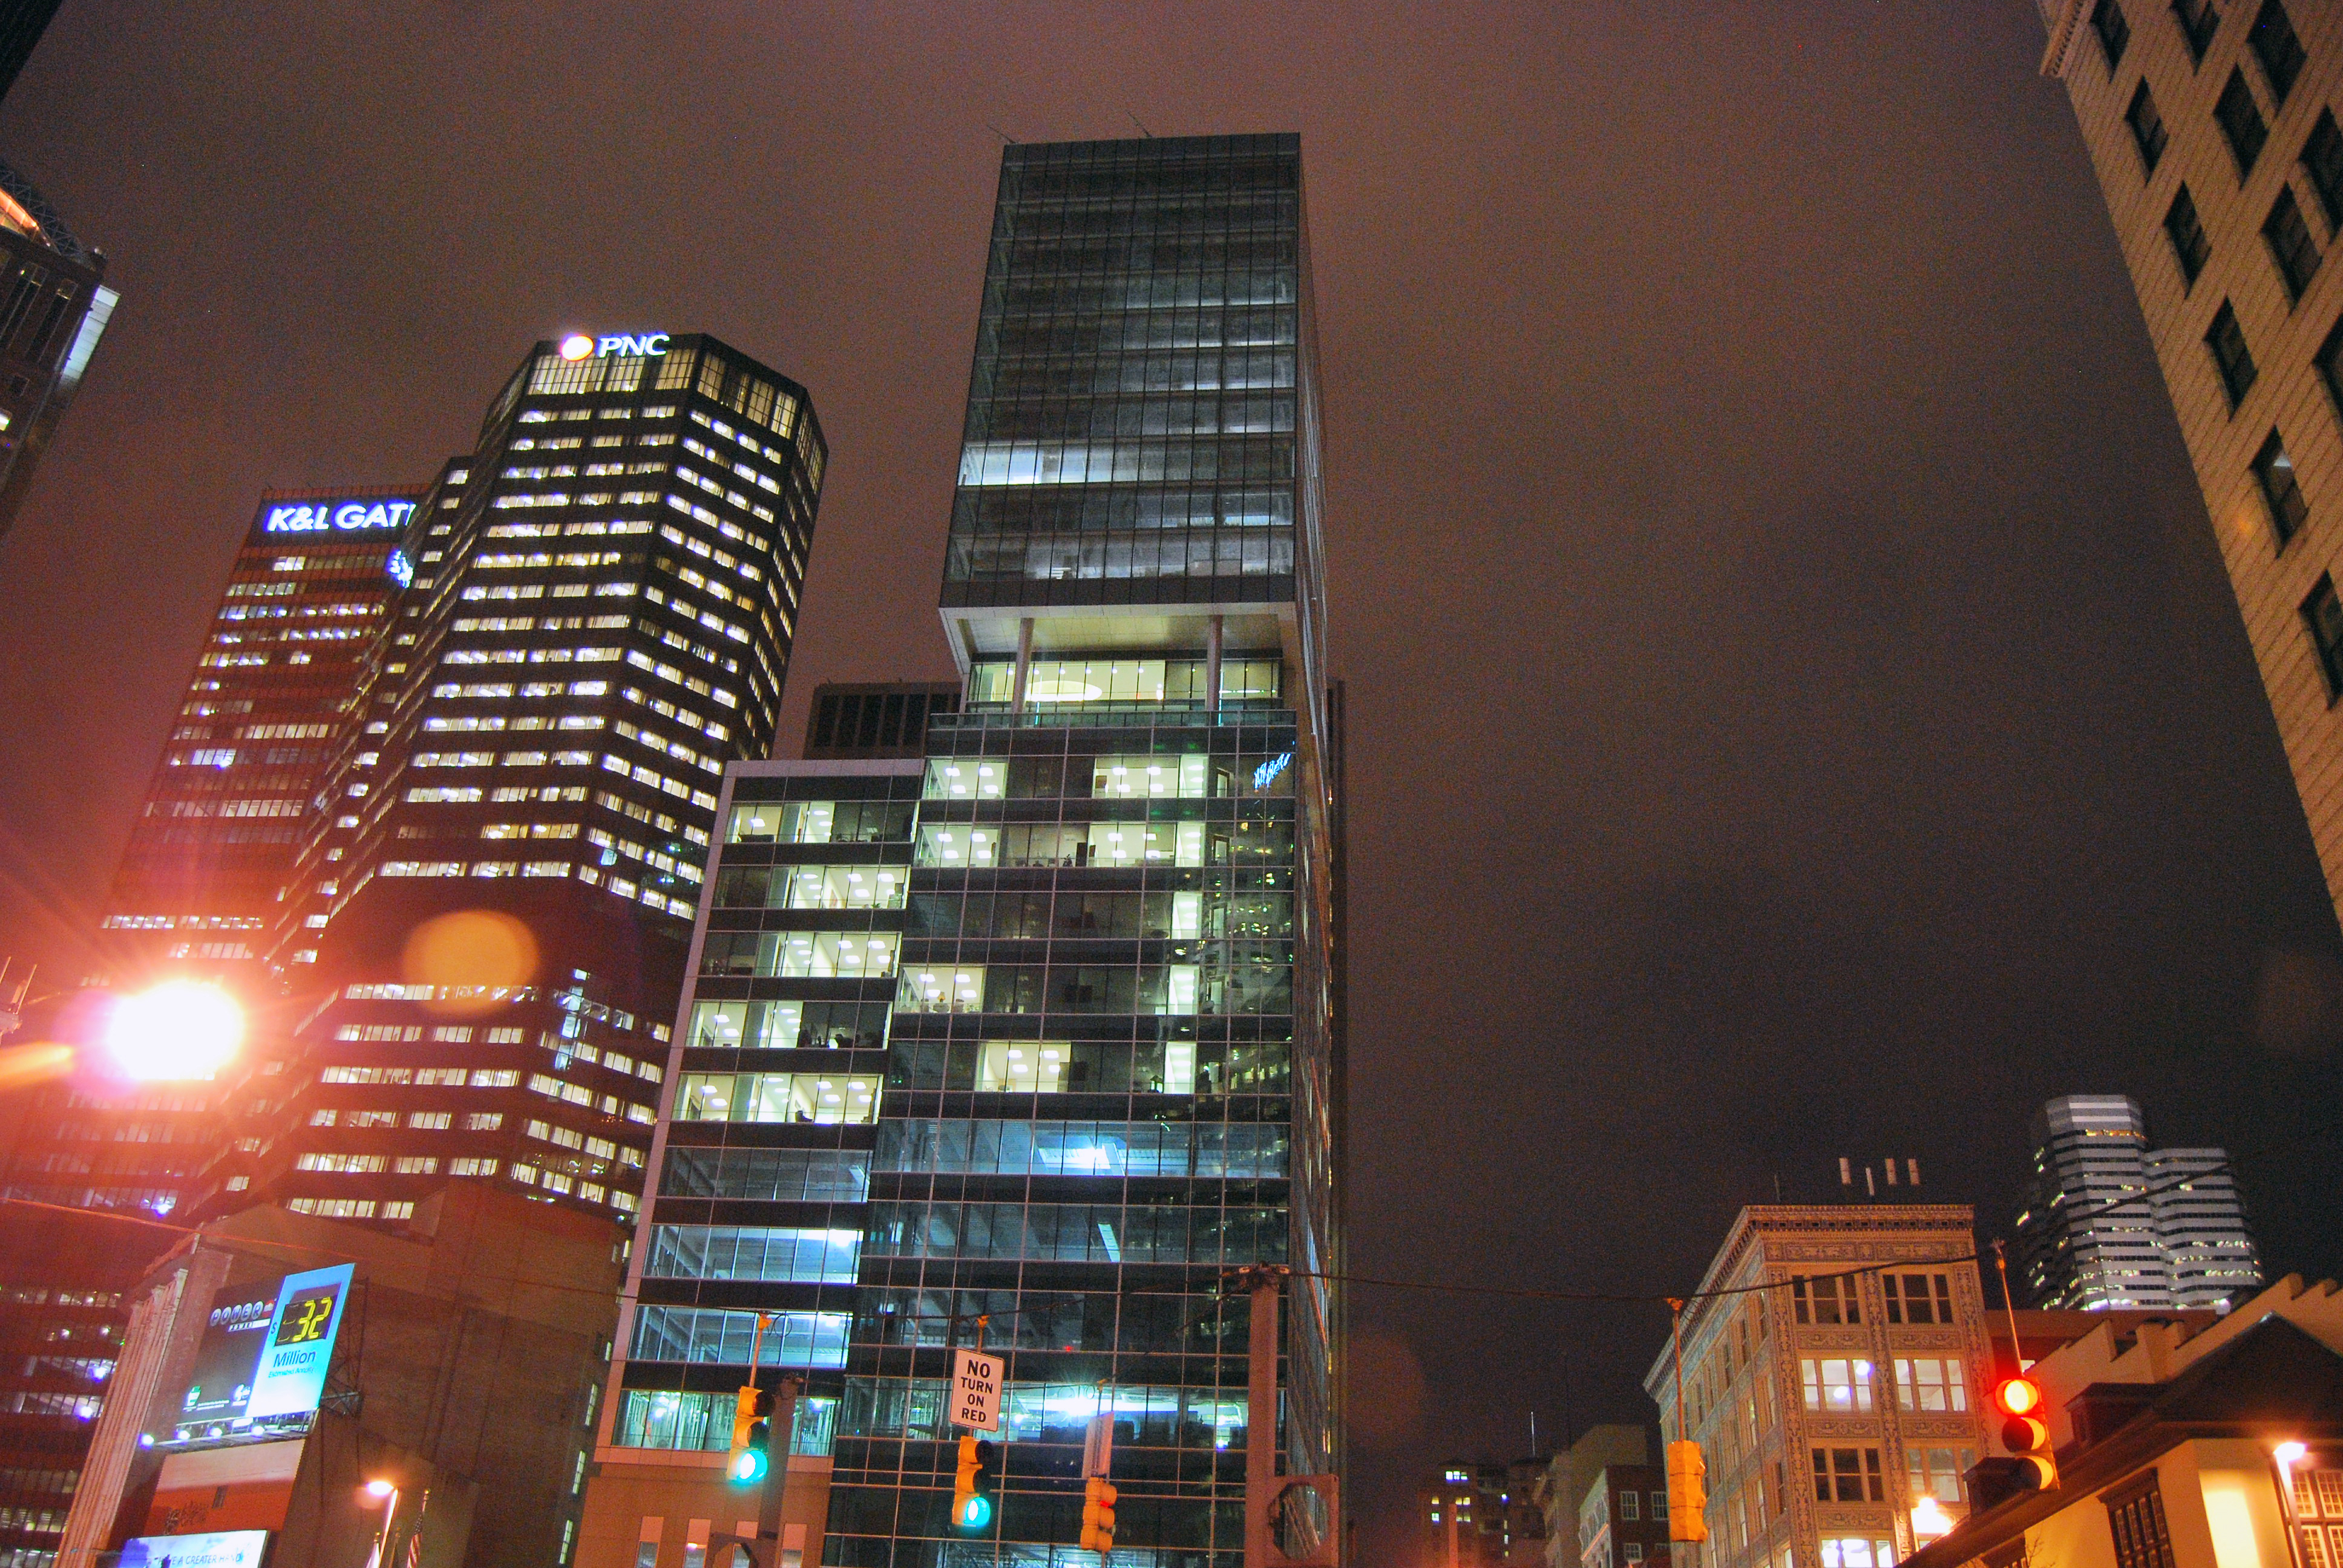 downtown pittsburgh at night 3